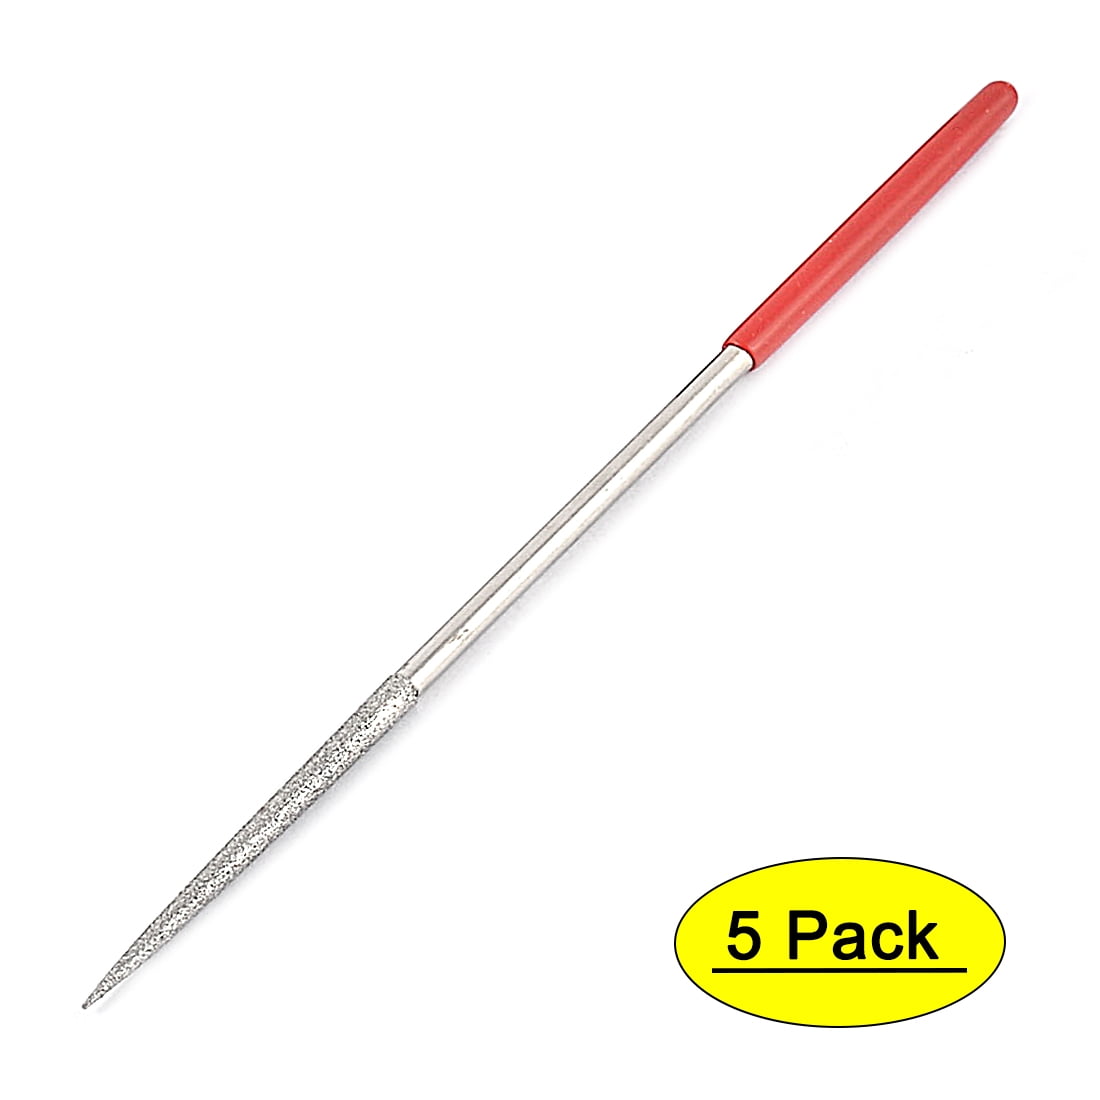 6-Inch Mill Diamond Files 180 Grit Metalworking Woodworking Tool Flat Type 